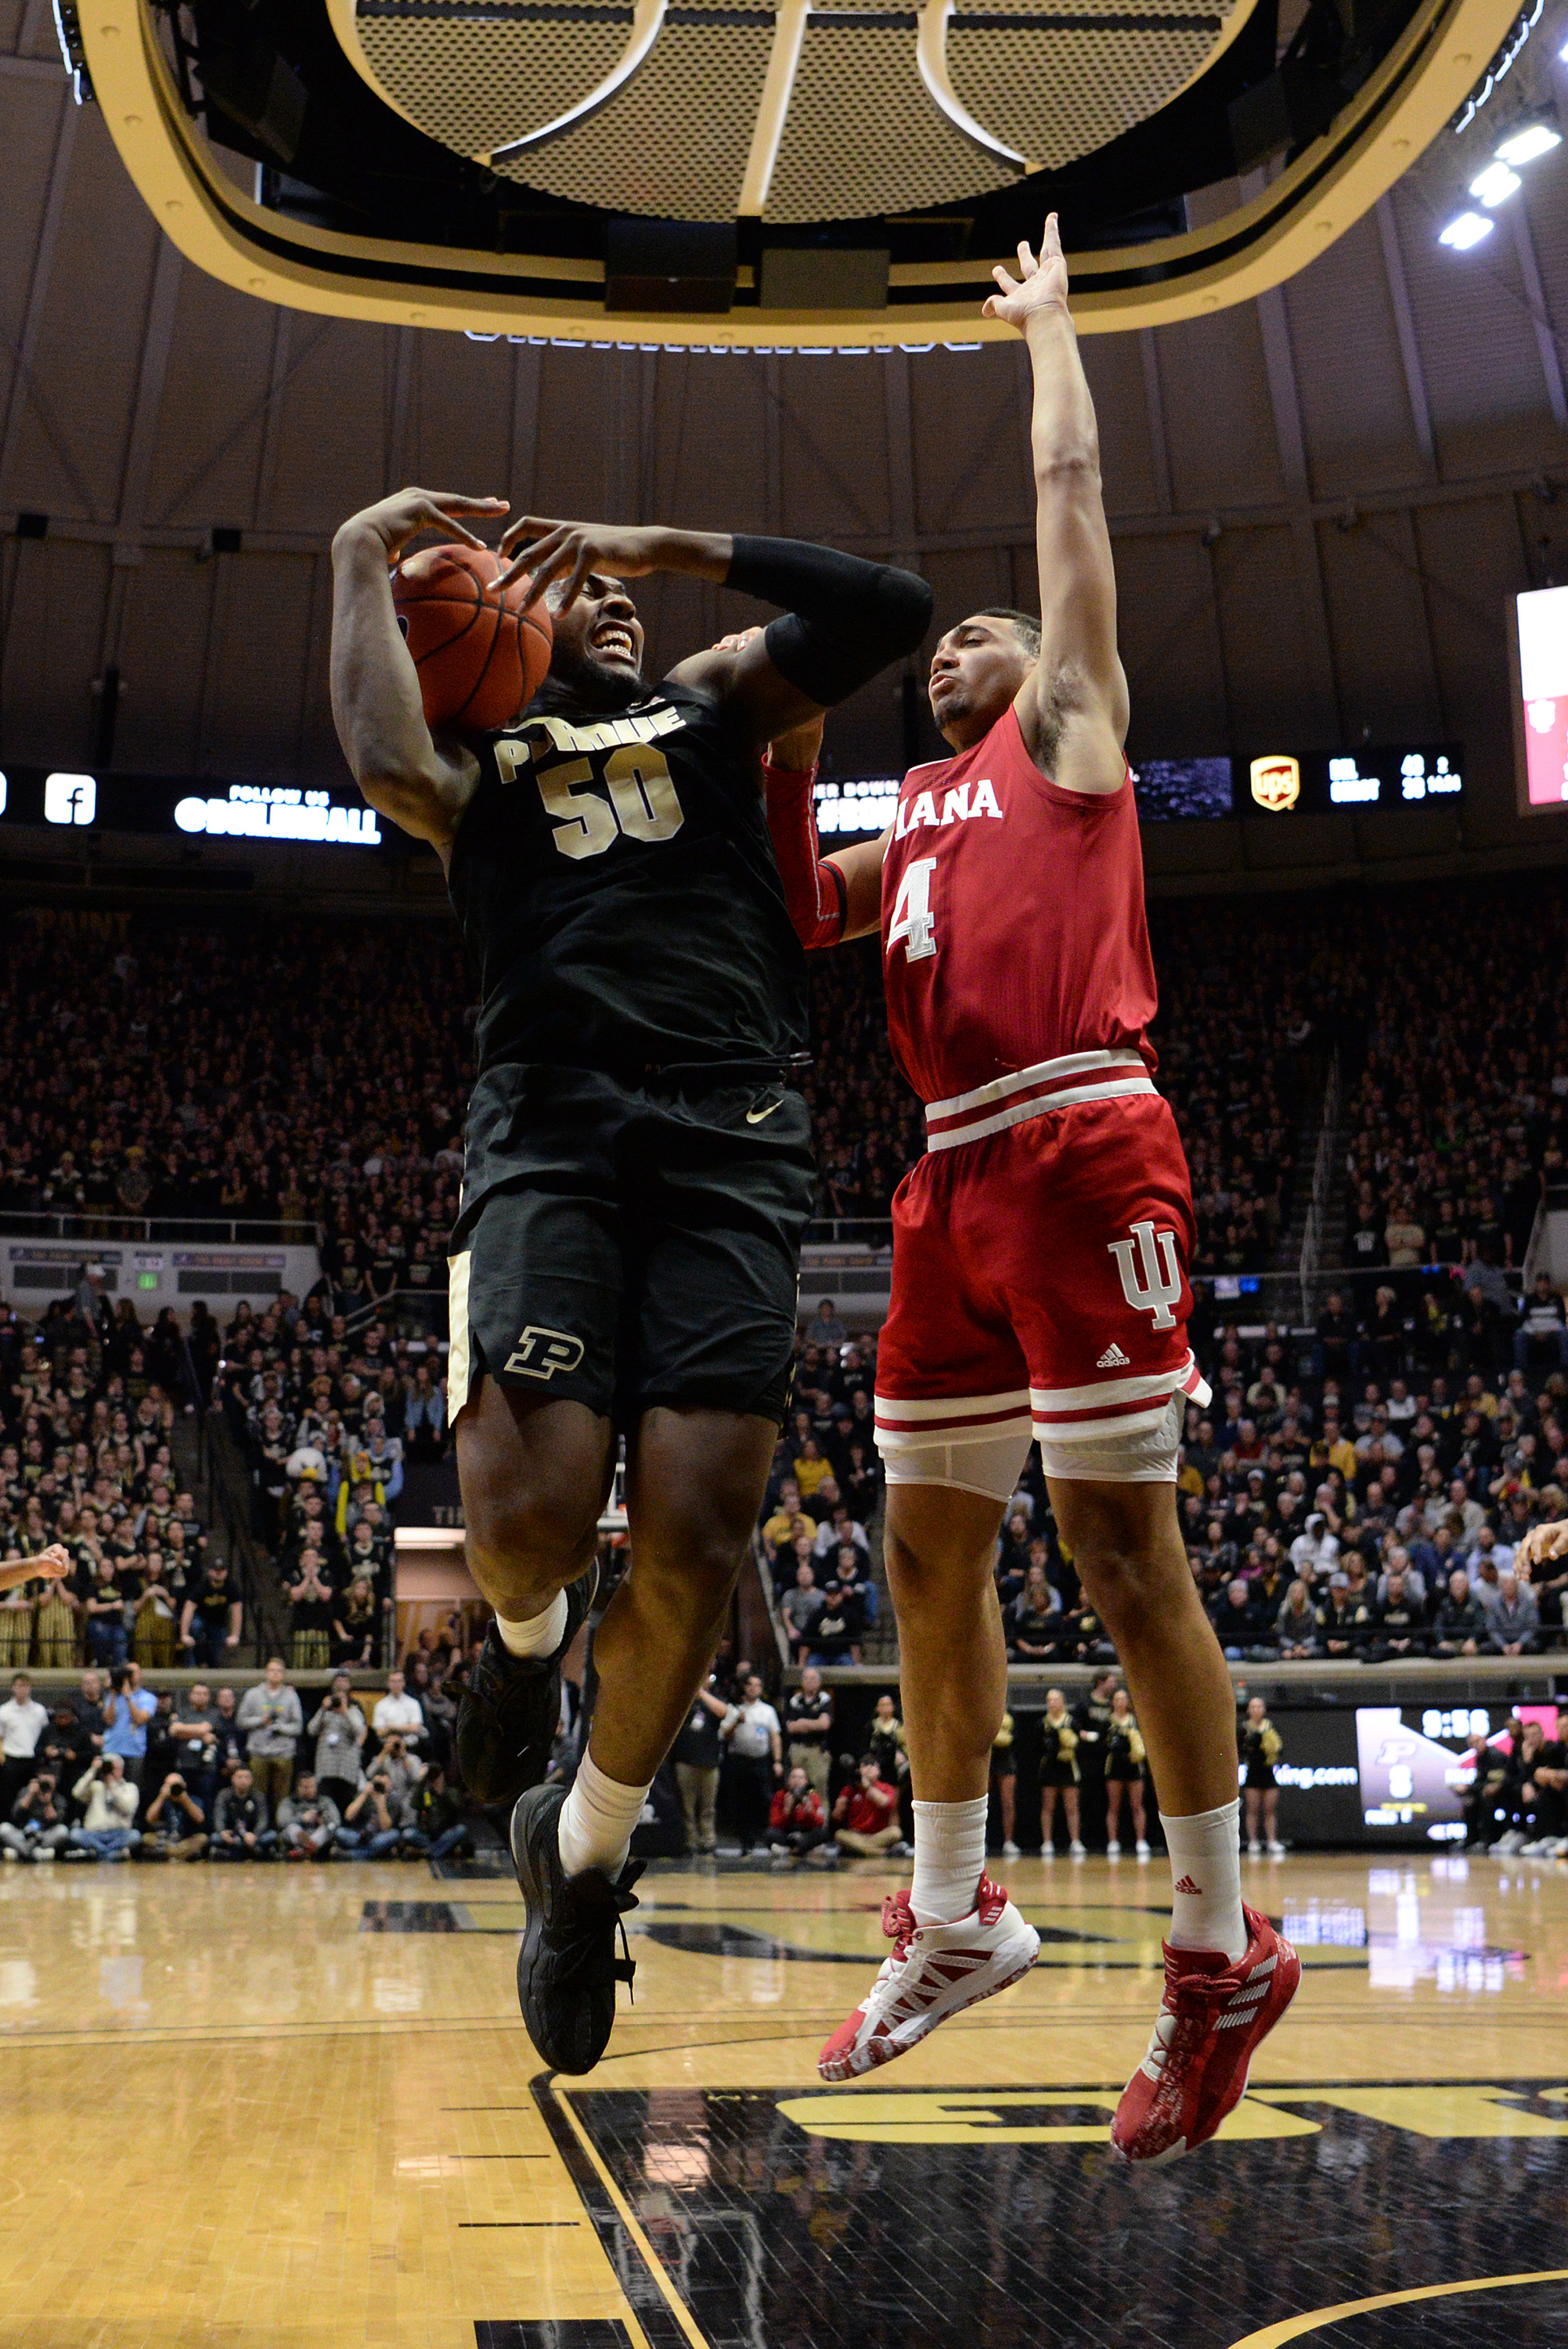 COLLEGE BASKETBALL: FEB 27 Indiana at Purdue